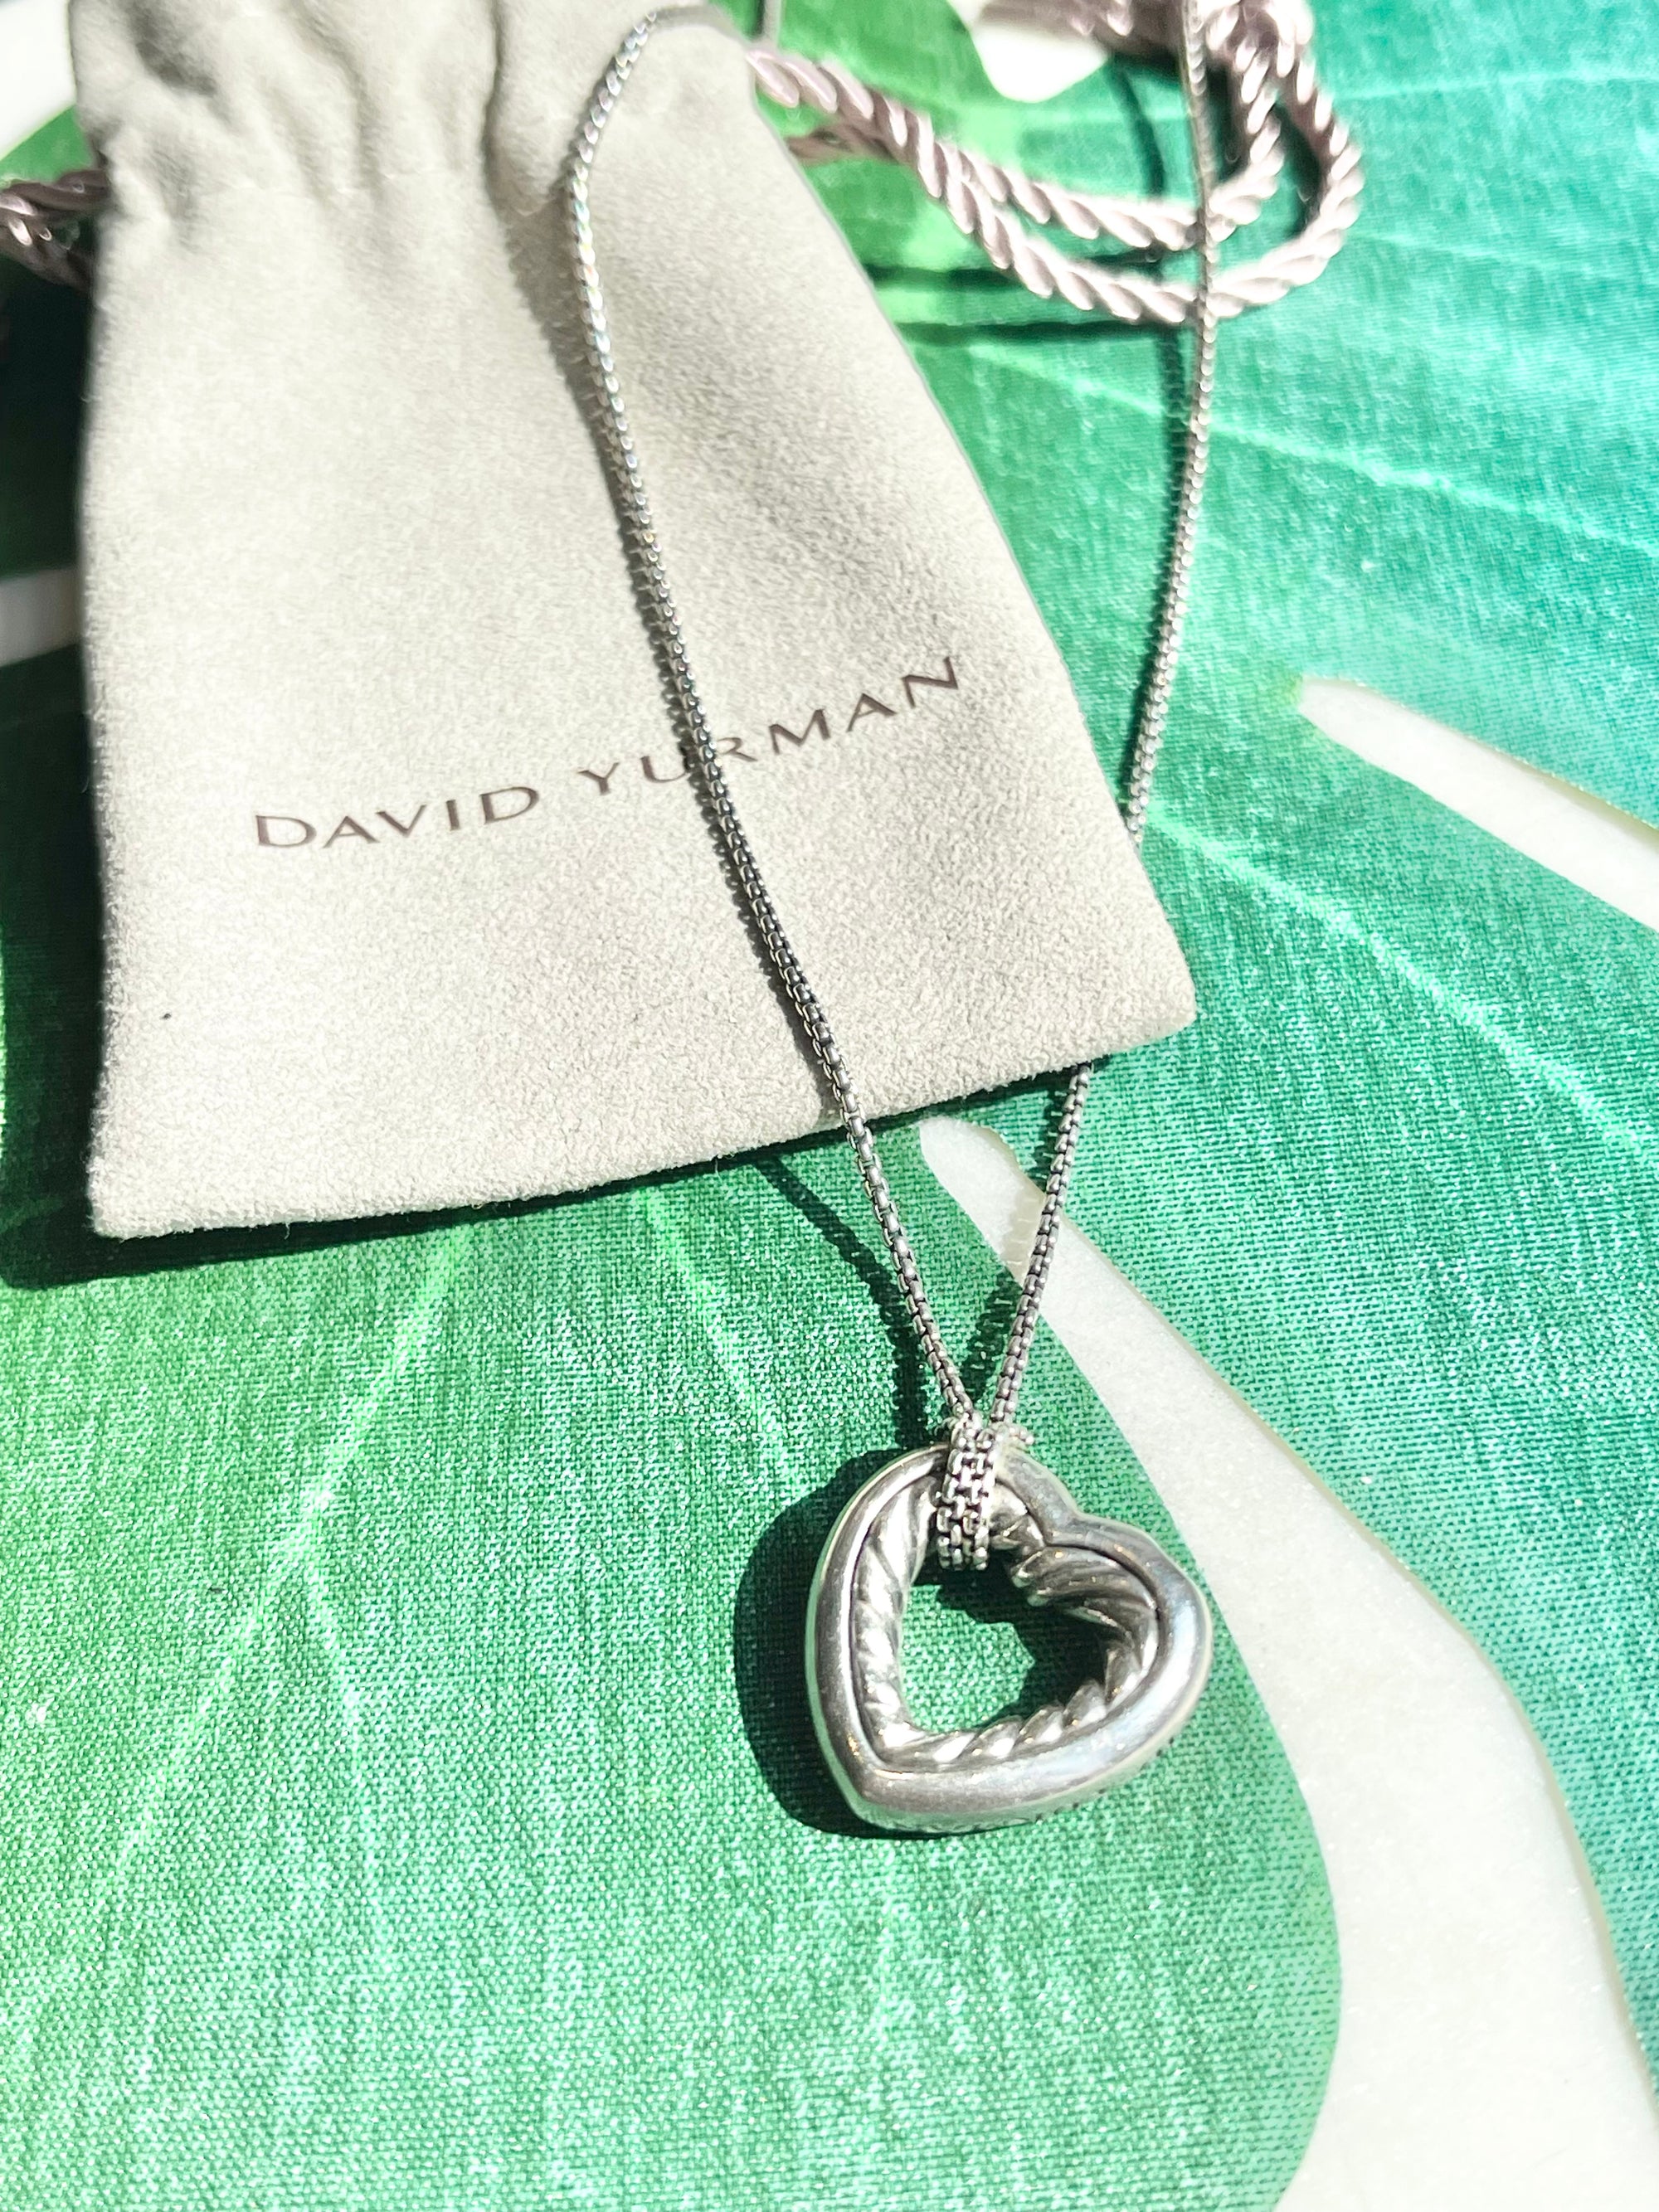 David yurman sterling silver open heart cable necklace